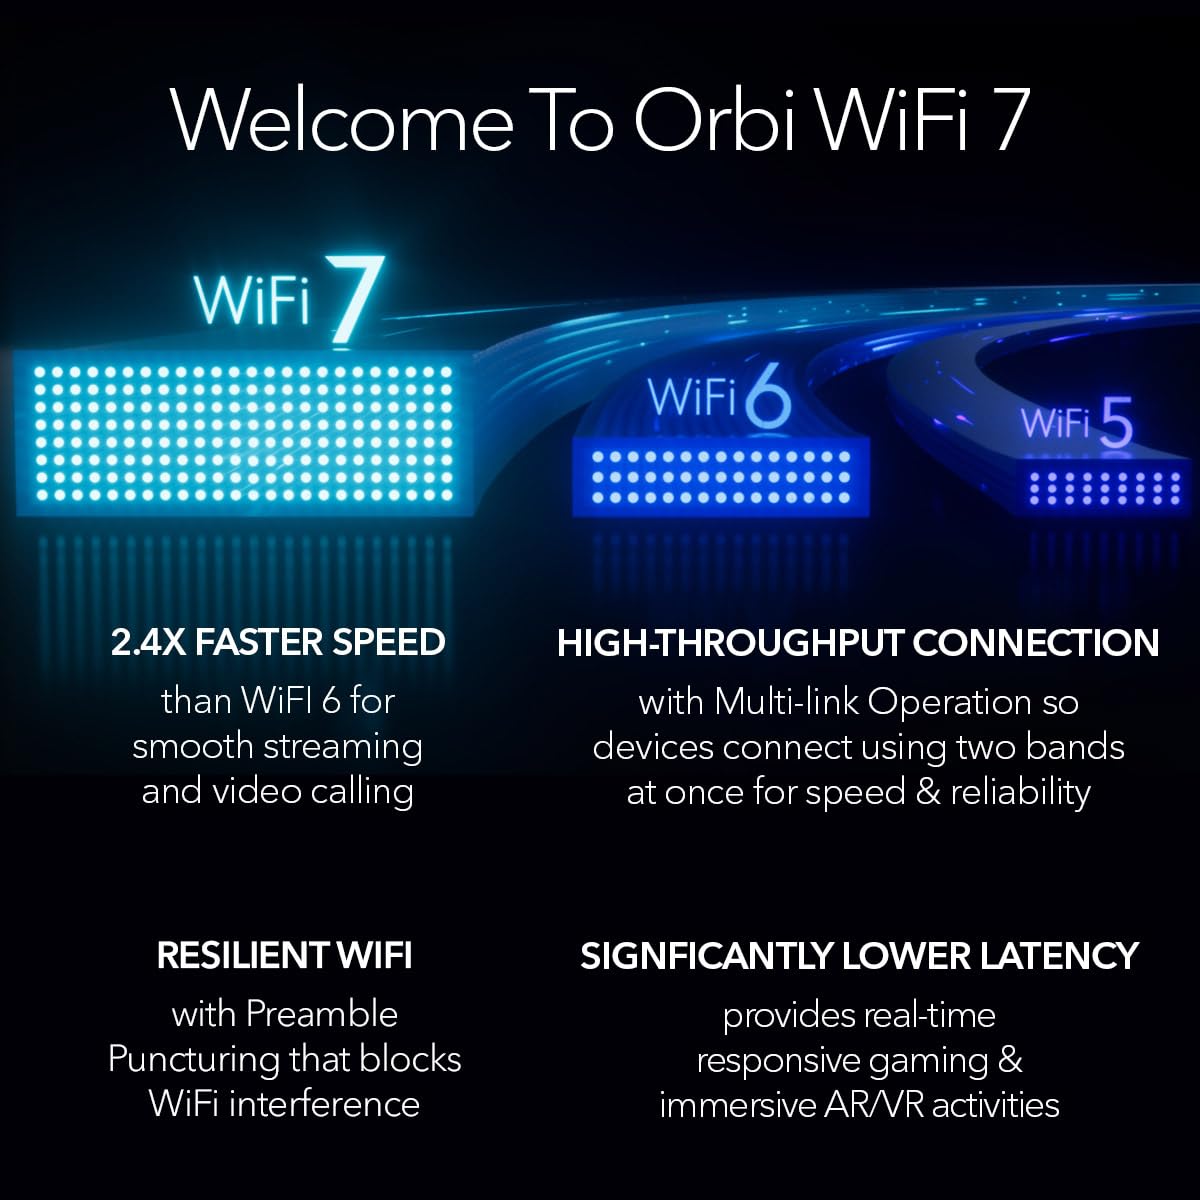 NETGEAR Orbi 970 Series Quad-Band WiFi 7 Mesh Network System (RBE973S), Router + 2 Satellite Extenders, Covers Up to 10,000 sq. ft., 200 Devices, 10 Gig Internet Port, BE27000 802.11be (Up to 27Gbps)